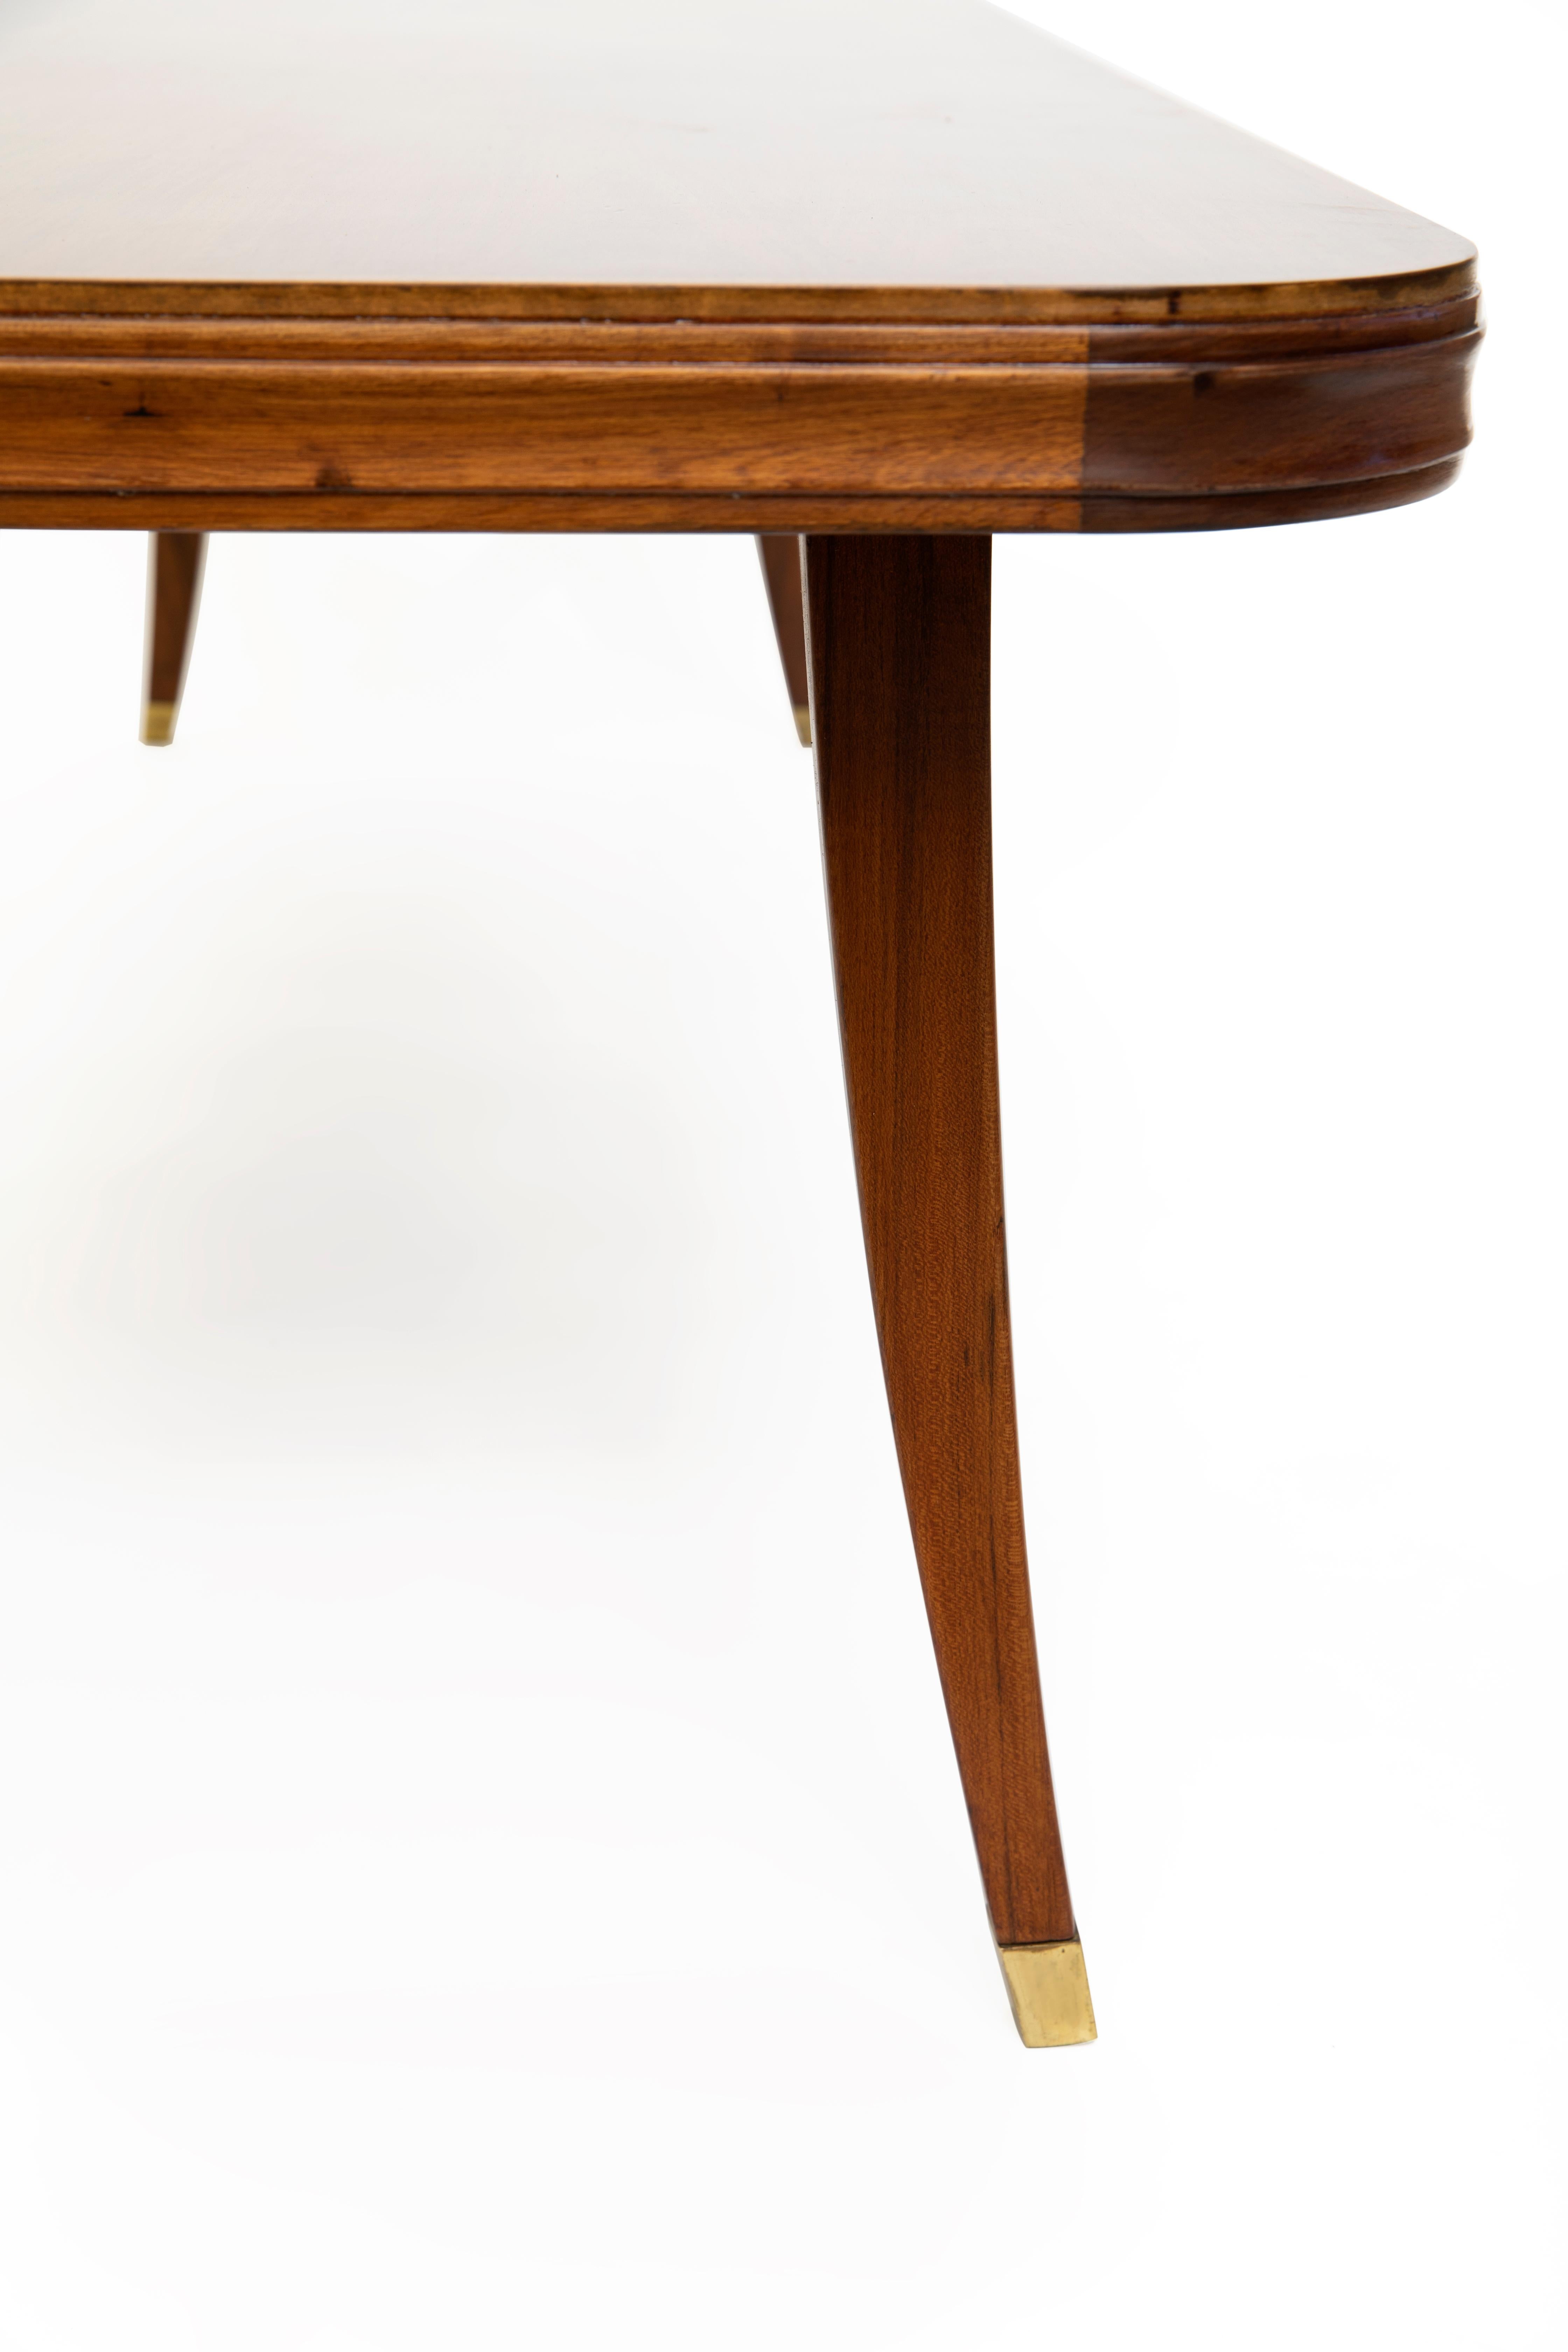 Argentine Pair of Wood and Bronze Low Tables by Comte, Argentina, Buenos Aires, circa 1940 For Sale